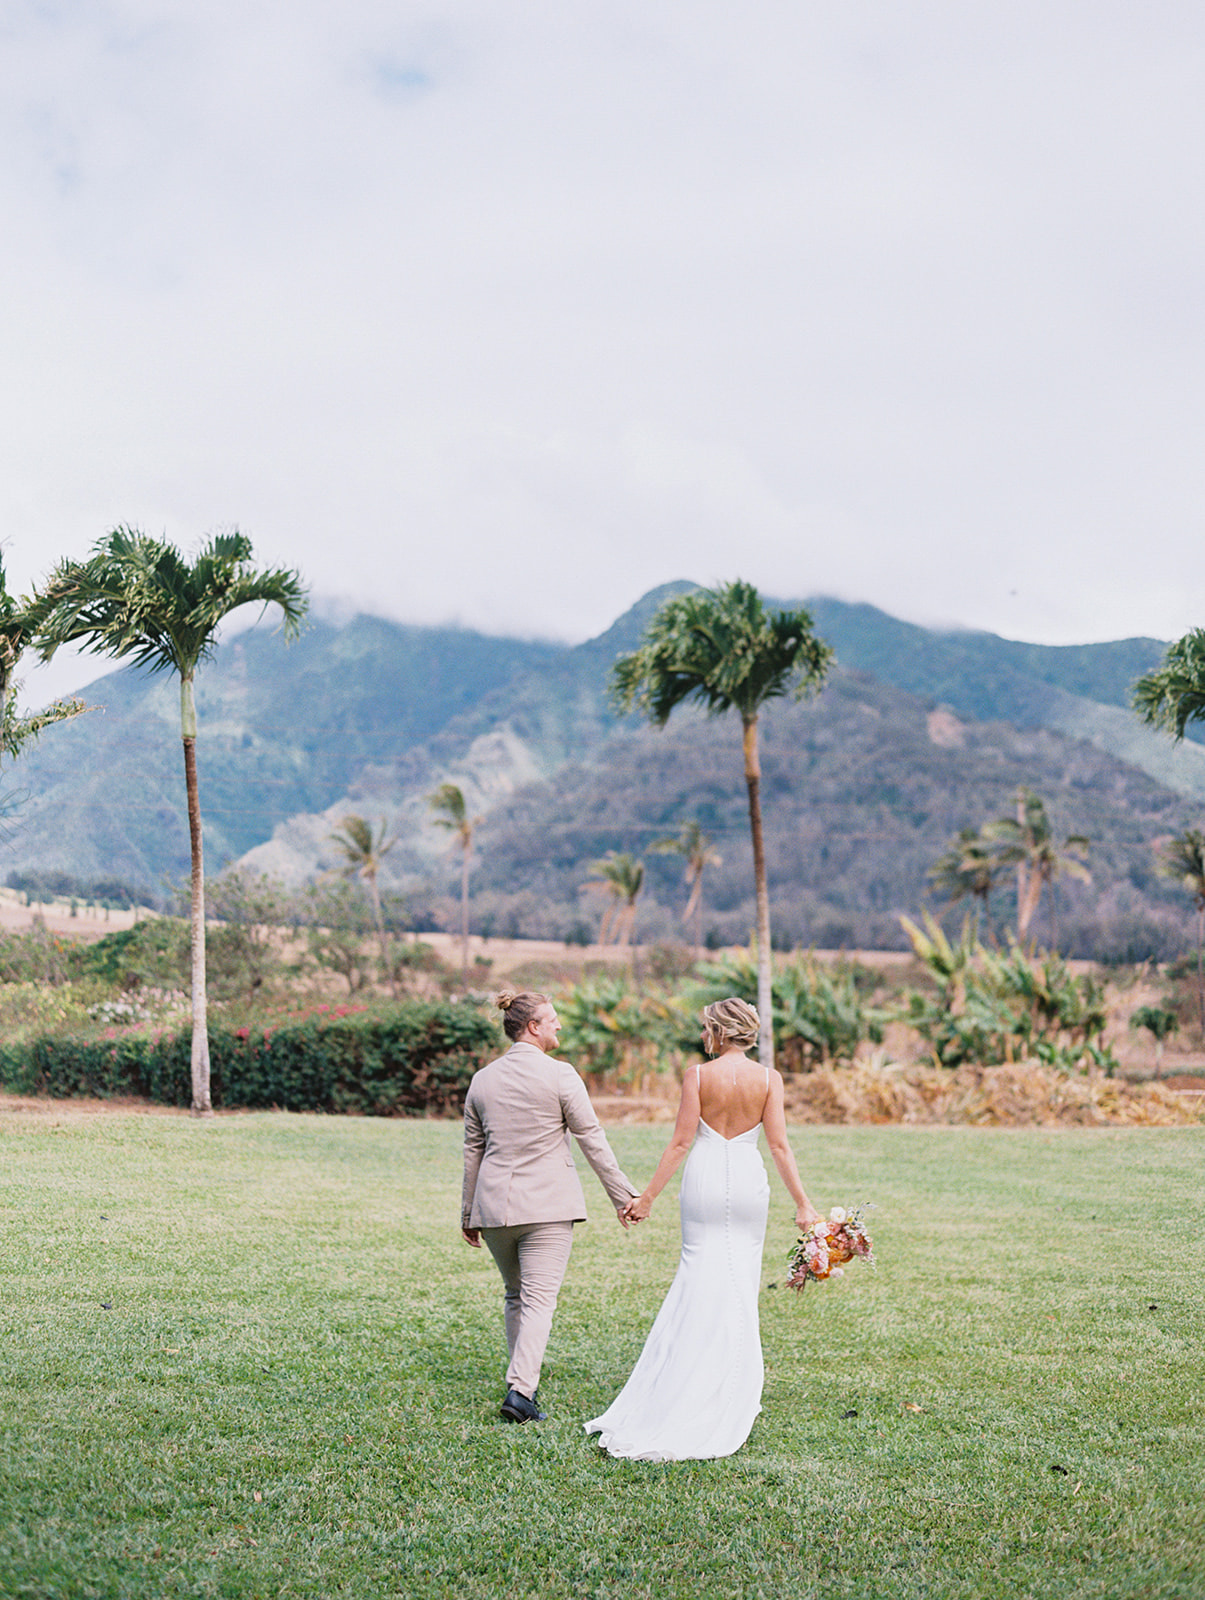 A bride and groom walking in Cafe Olei on Maui